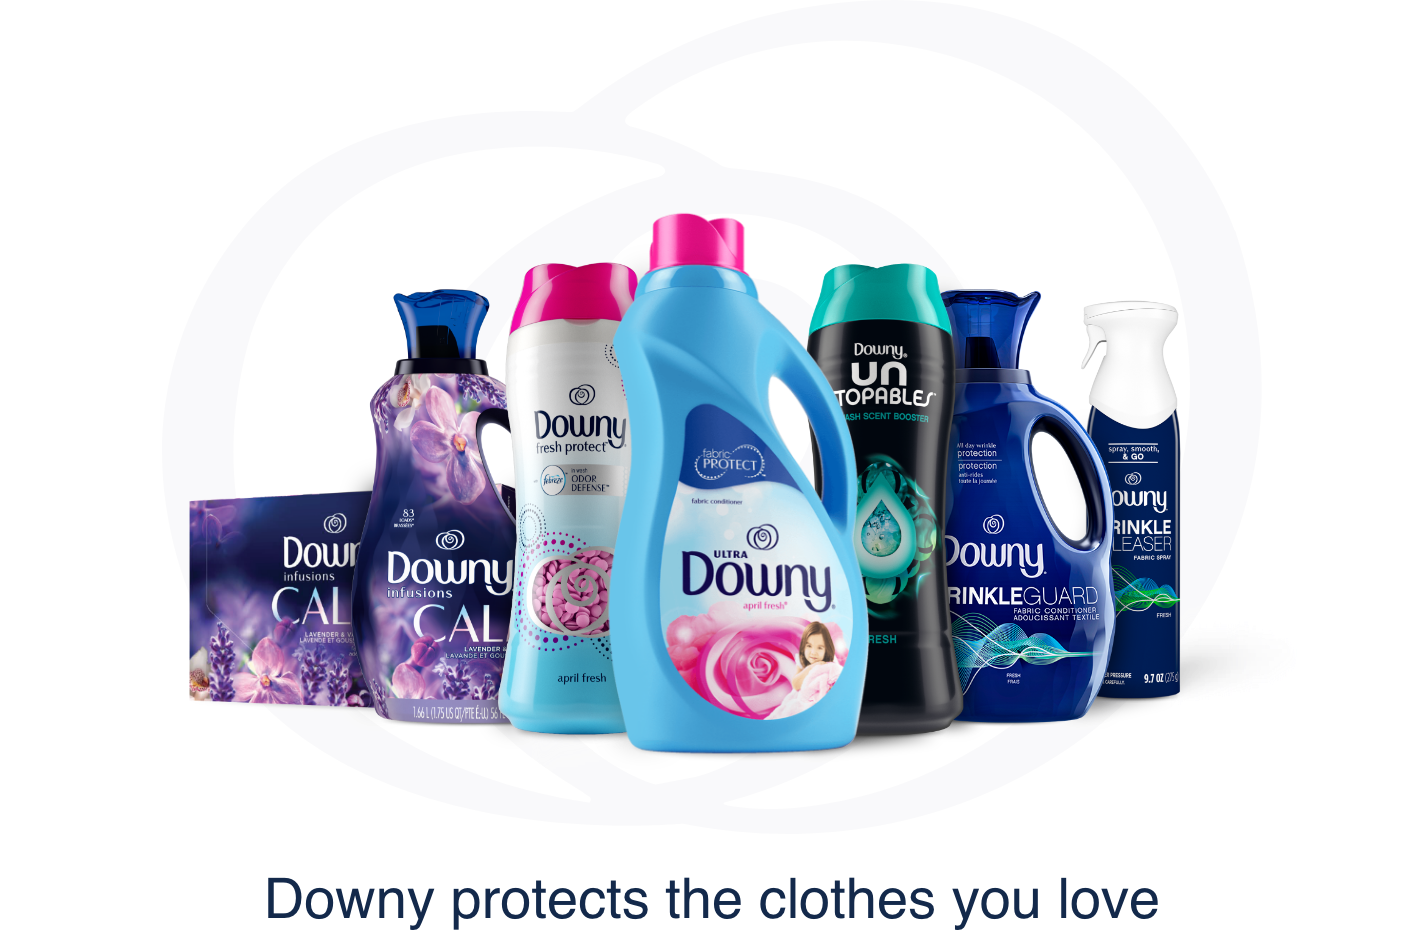 Downy Fabric Conditioners to protect the clothes that you love